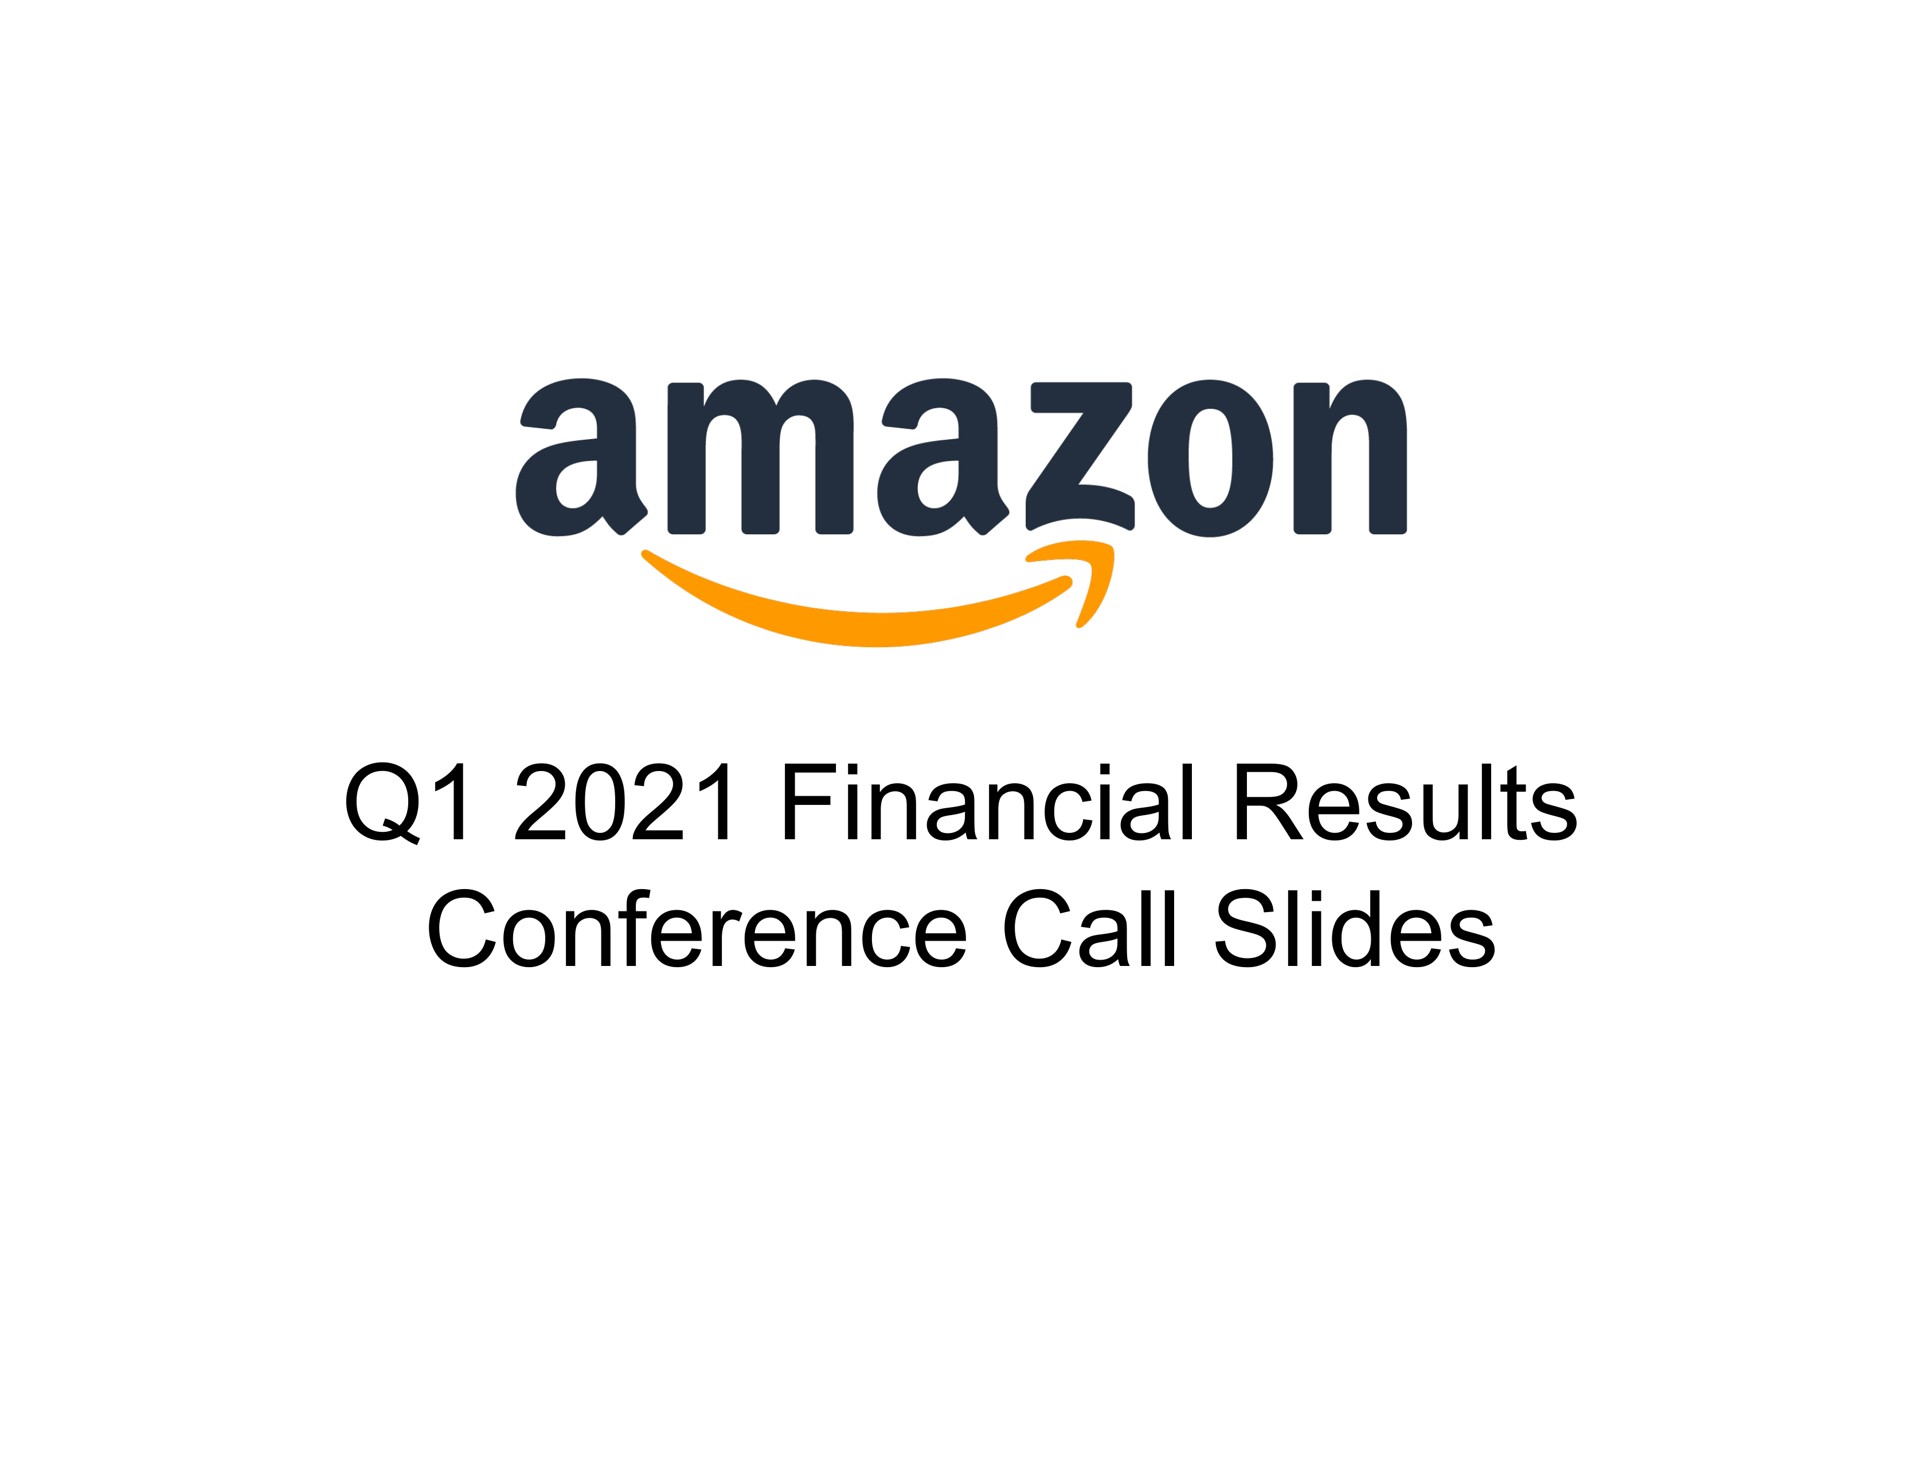 financial results conference call slides | Amazon